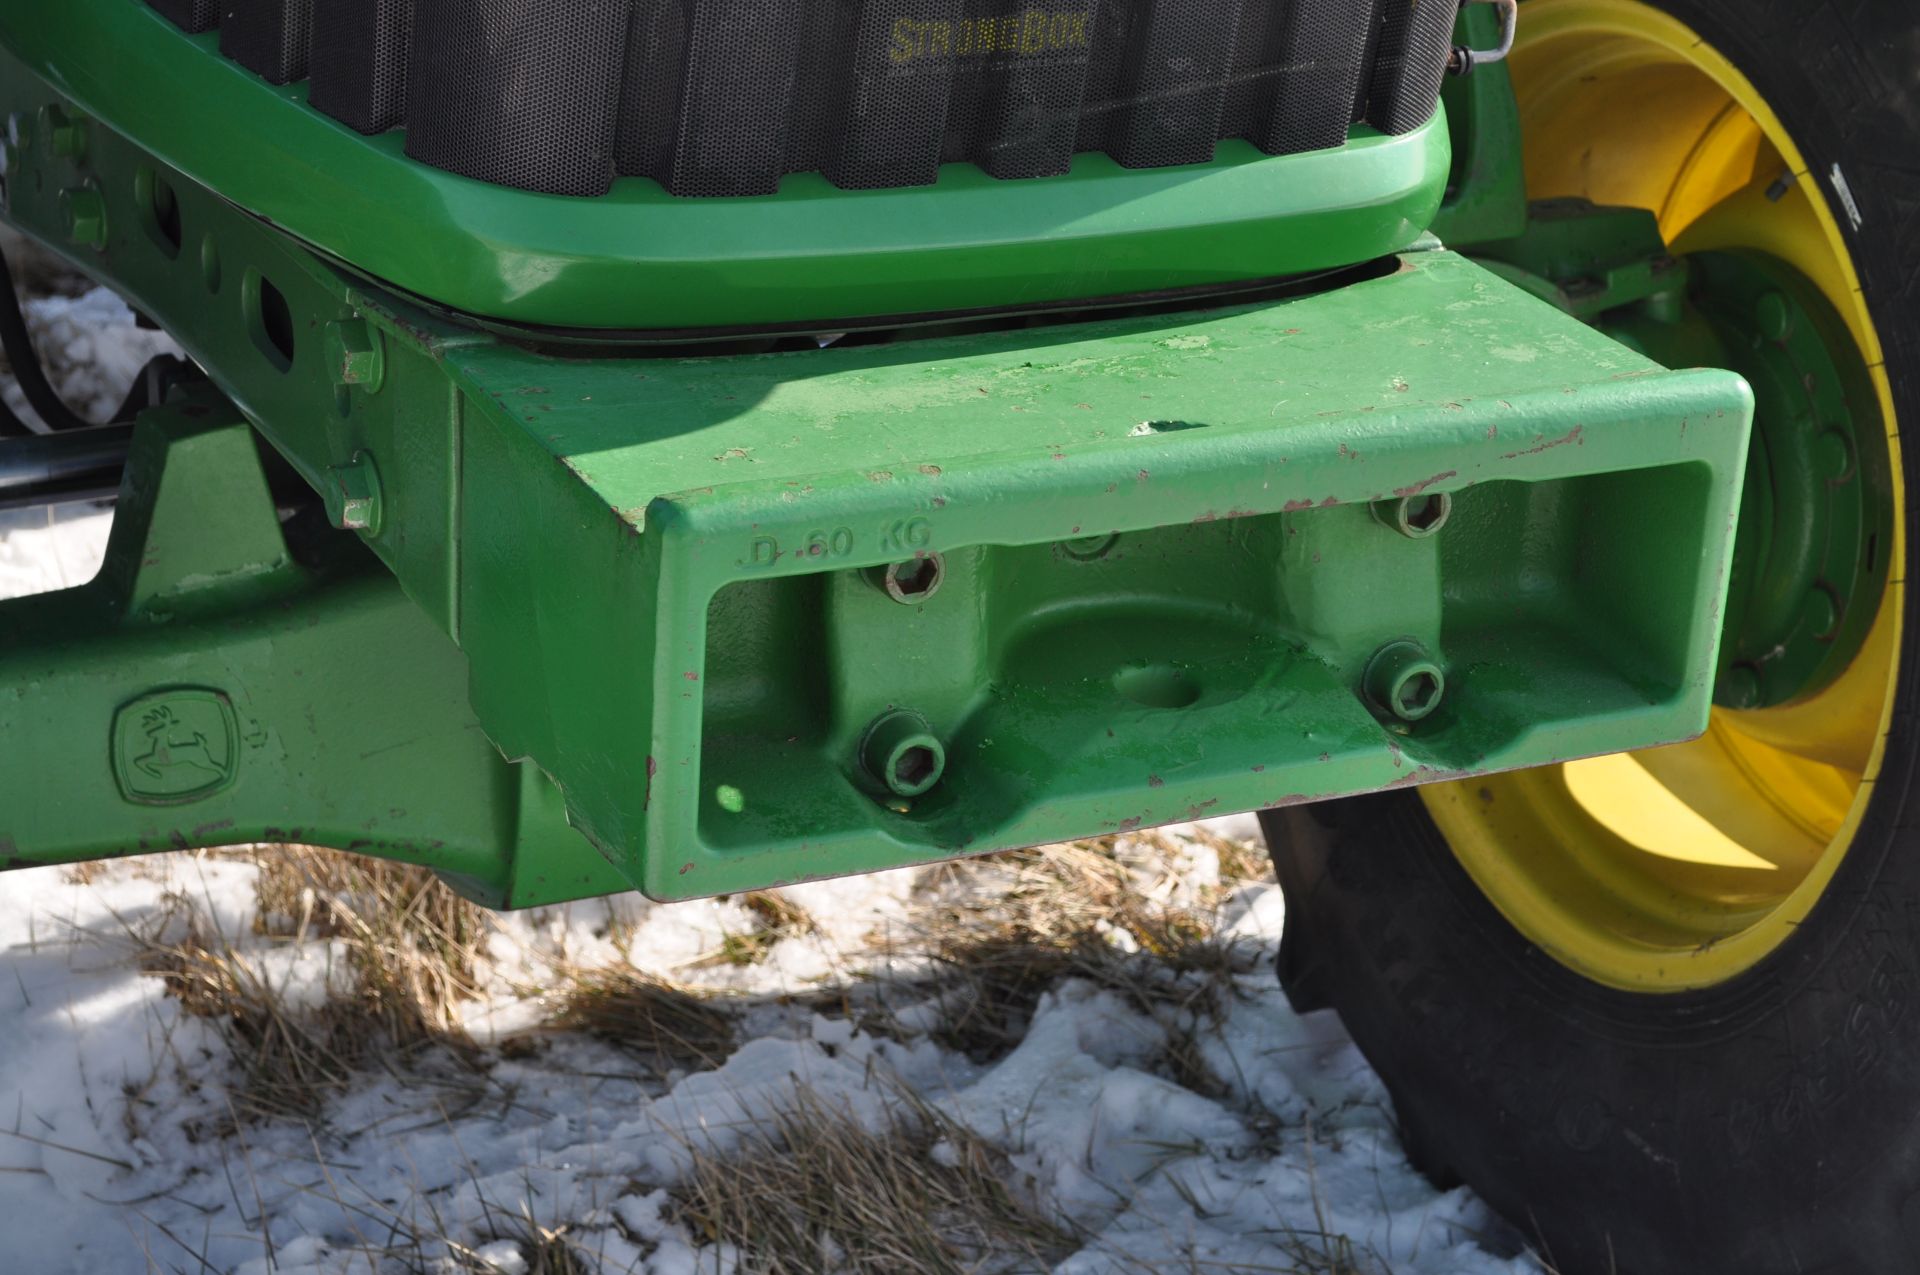 John Deere 6430 tractor, MFWD, C/H/A, 6x4 trans, 460/85R38 rear, 420/85R24 front, front fenders, - Image 7 of 36